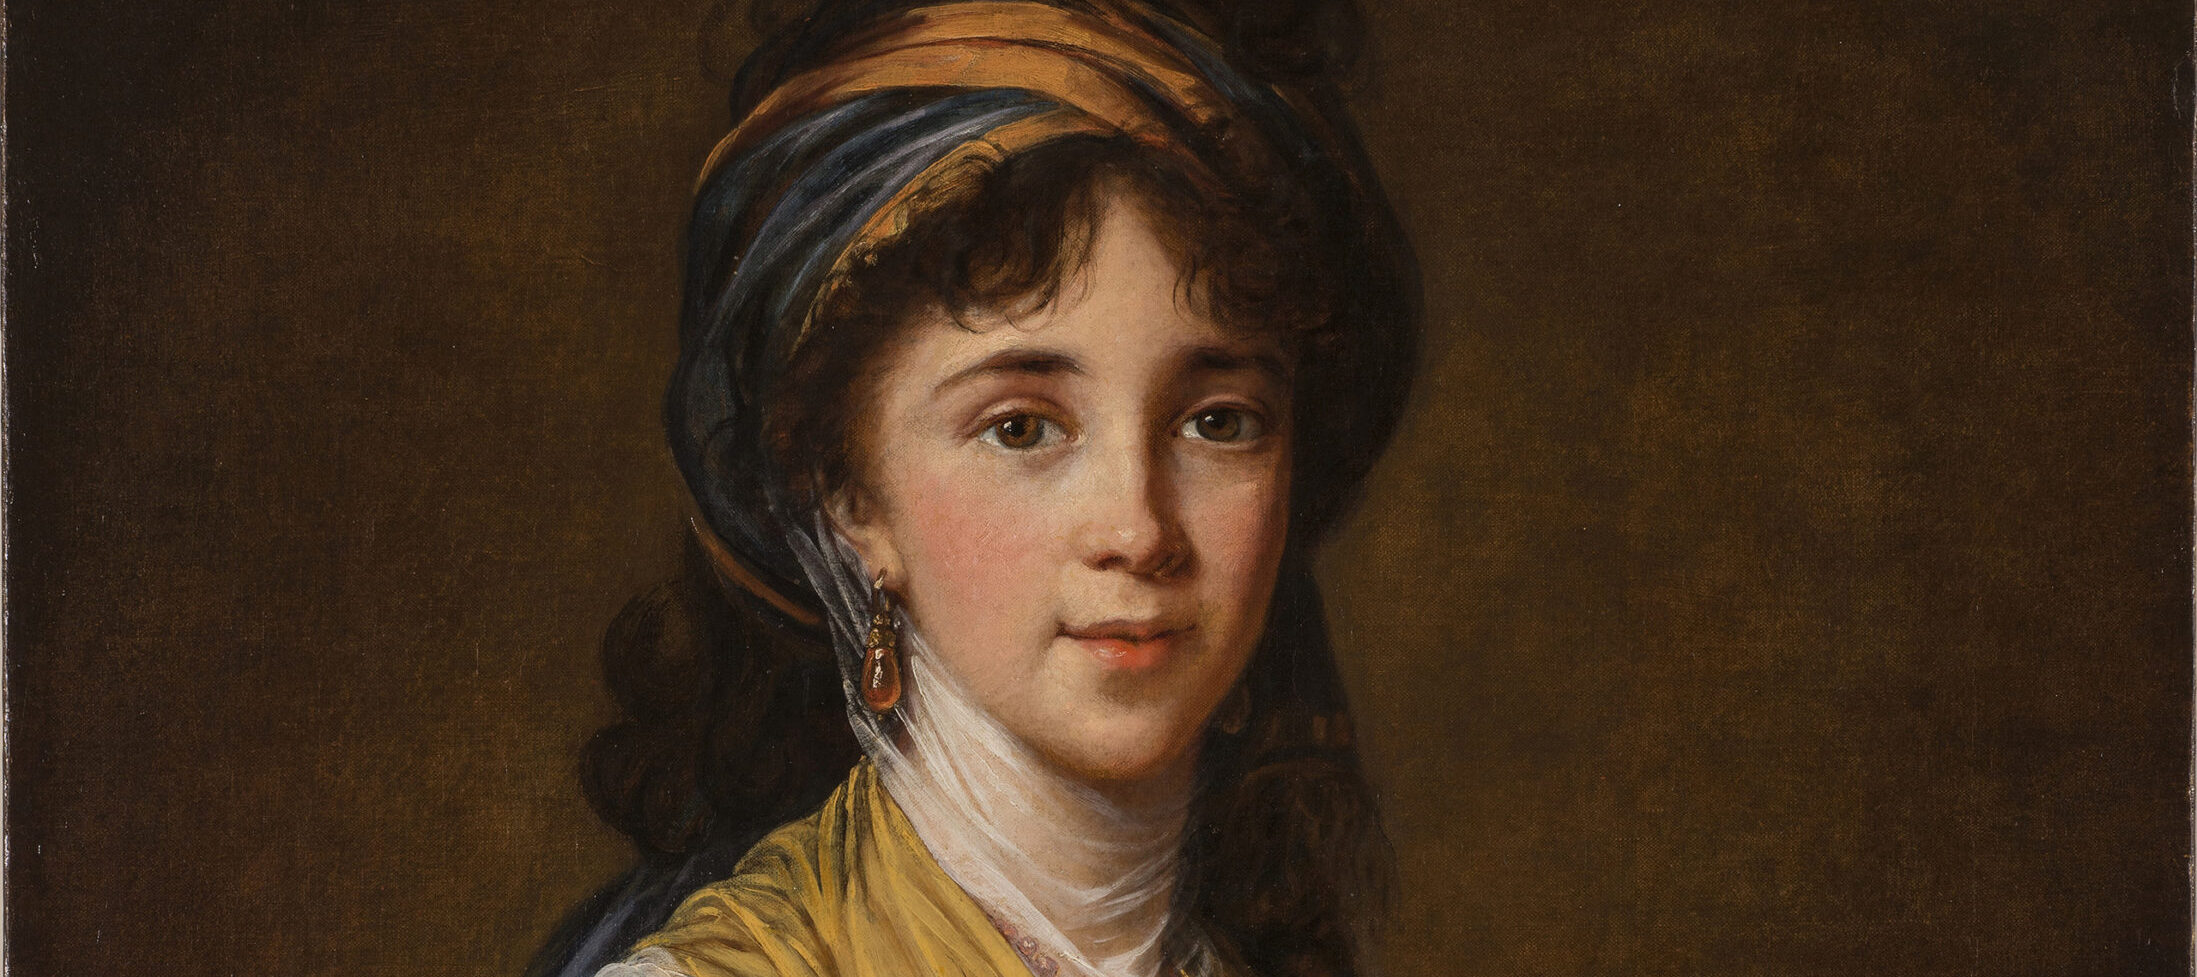 Realistically rendered half-portrait of a light-skinned young woman, gazing directly at the viewer with a faint smile on her lips. Her dark, curly hair is attractively tousled, secured under a turban-like headdress which matches her gold and blue draped ensemble.